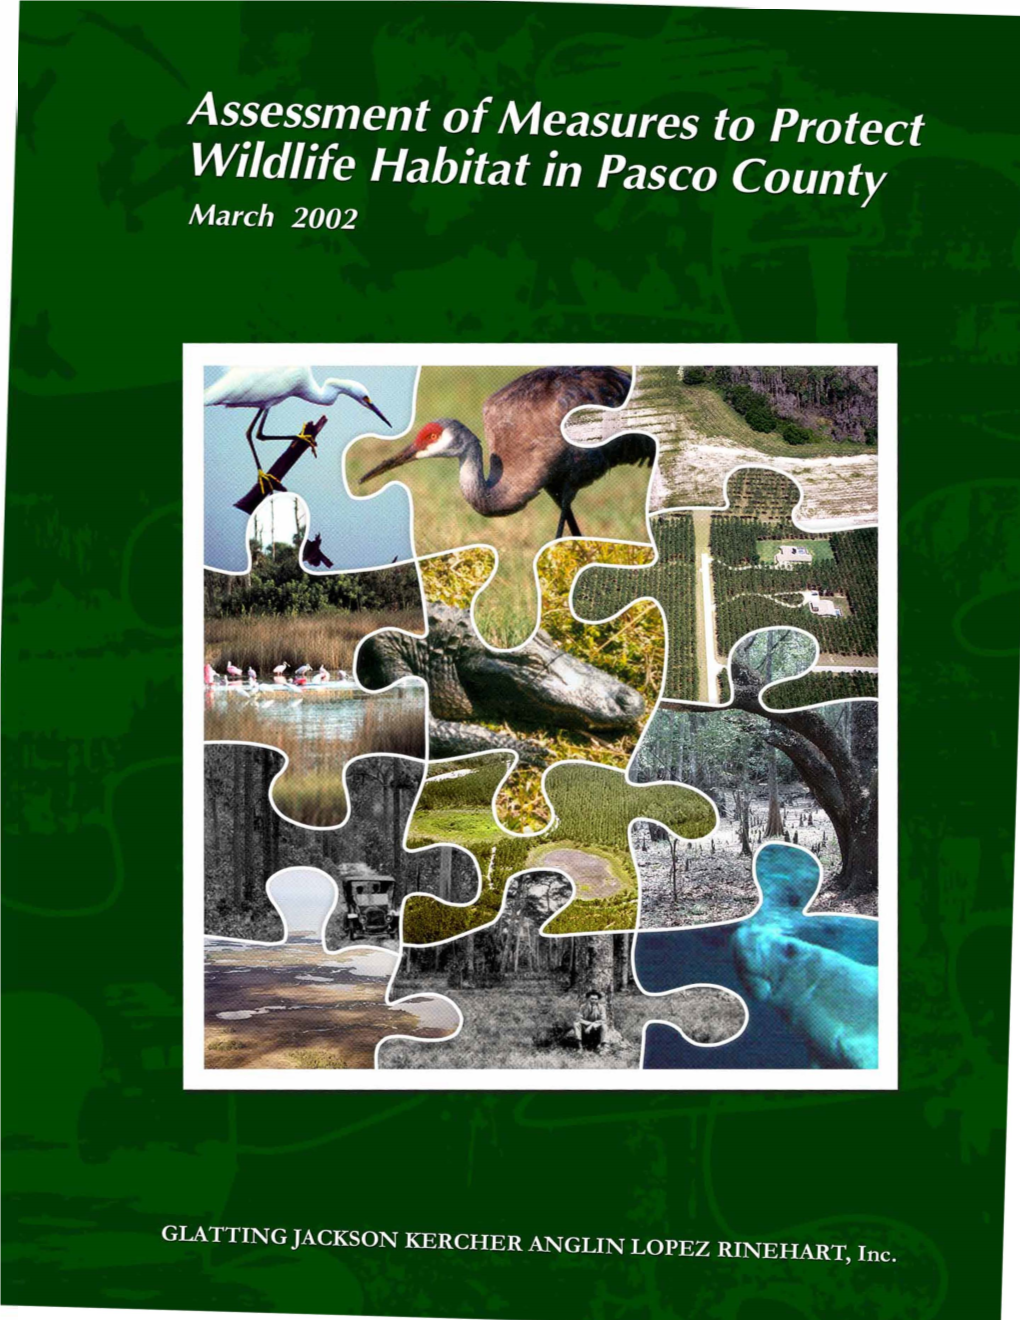 The Assessments of Measures to Protect Wildlife Habitat in Pasco County Report